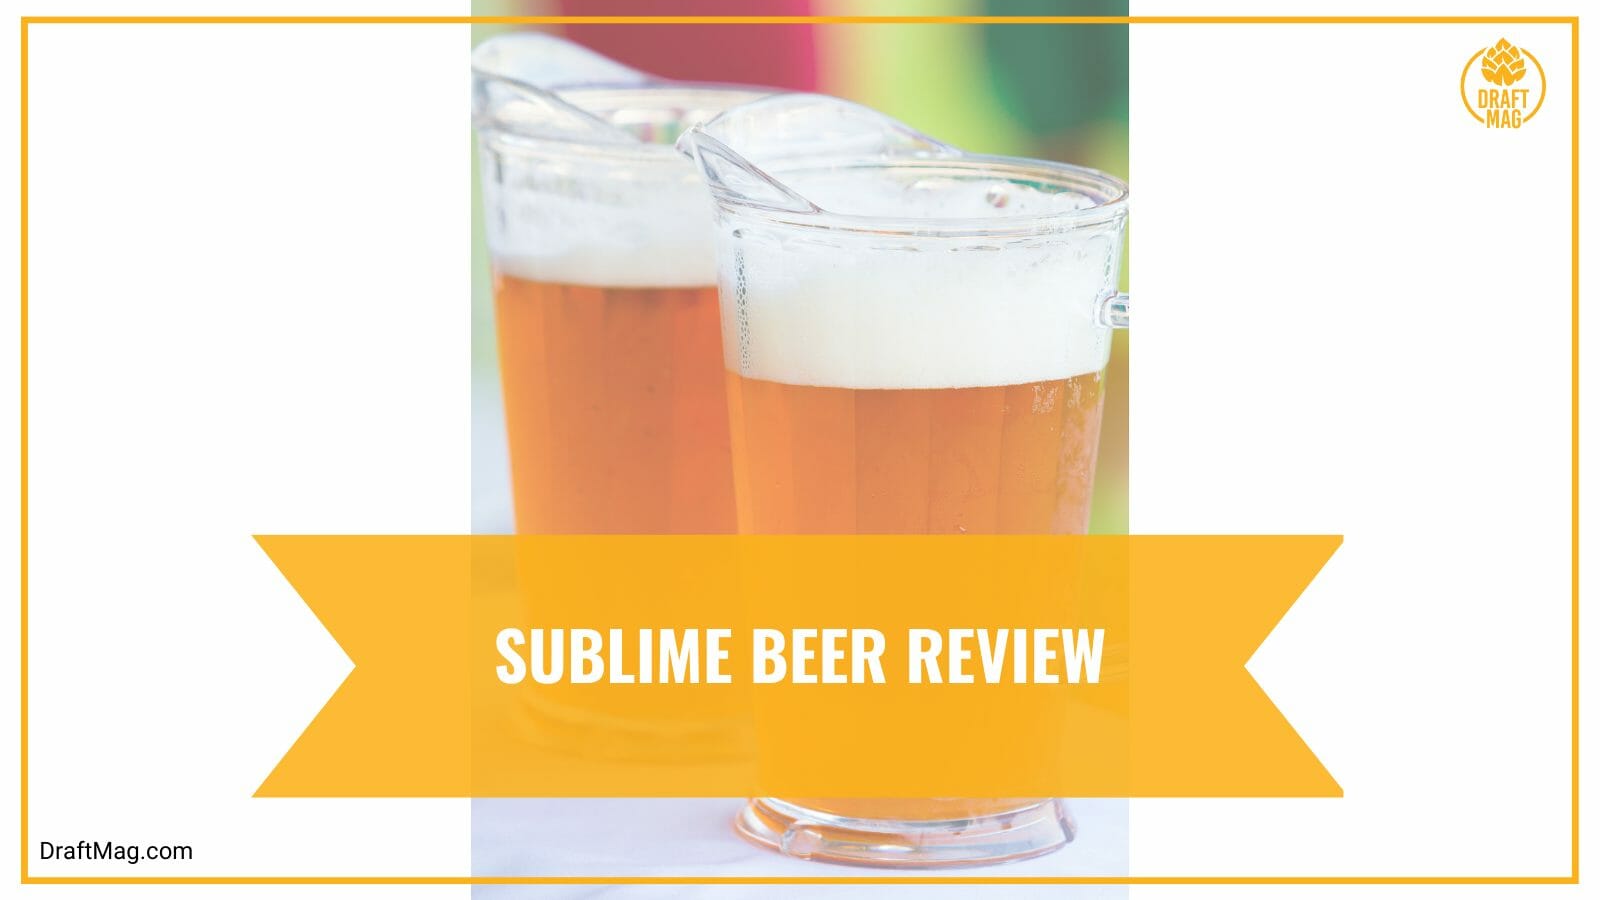 Sublime beer examination